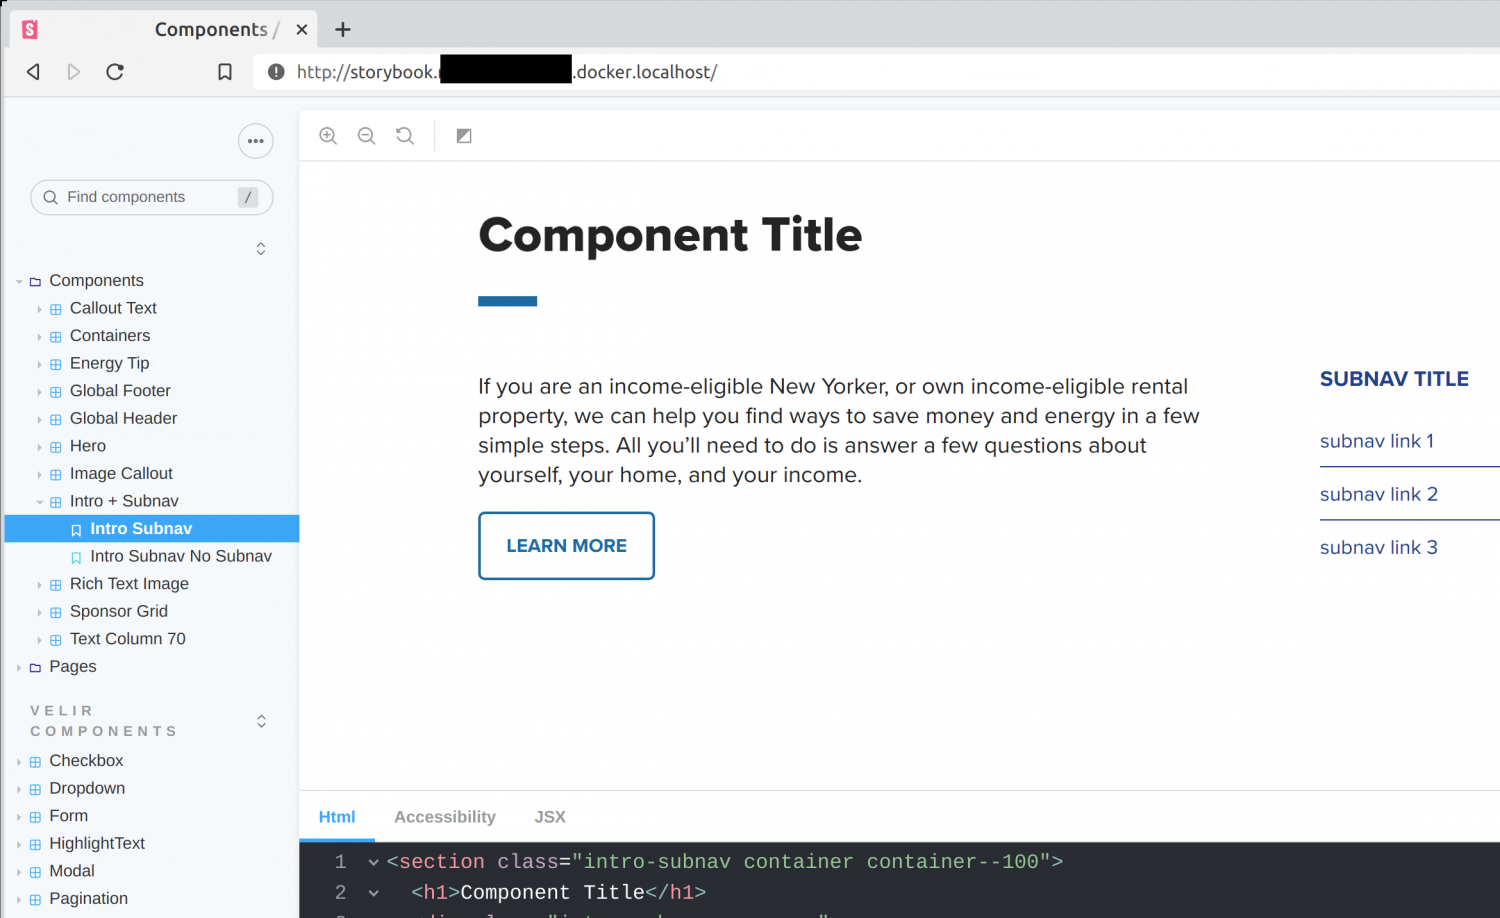 A screenshot of what it looks like to edit Storybook components in Docker using a web browser.